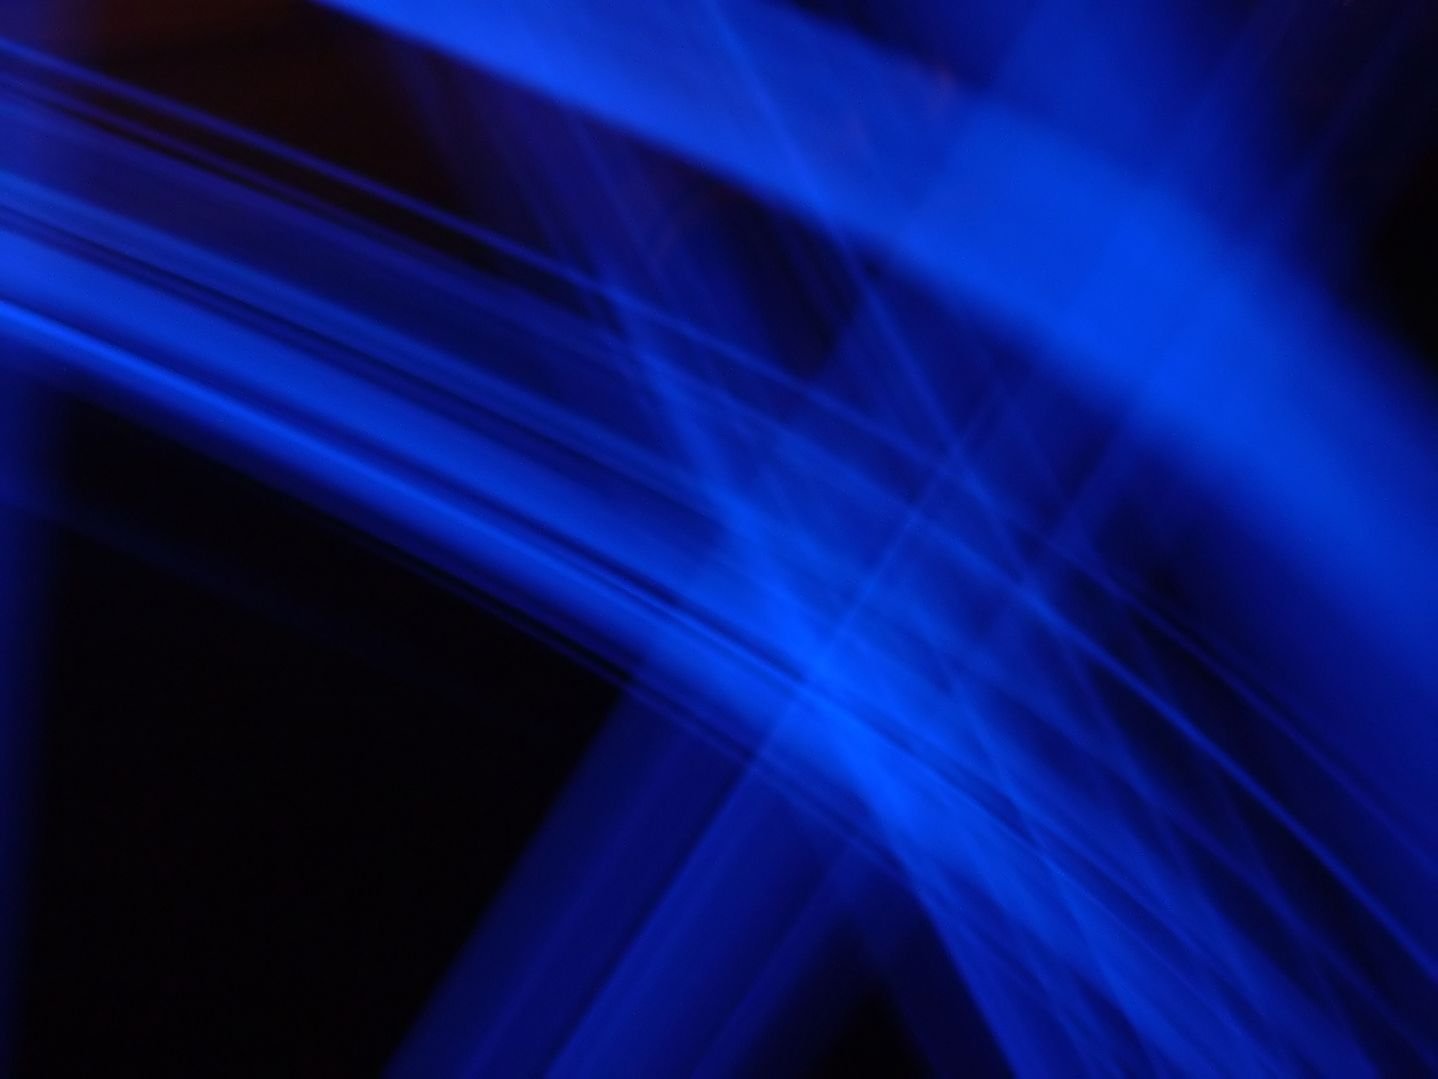 a blurry image of a bright blue abstract line